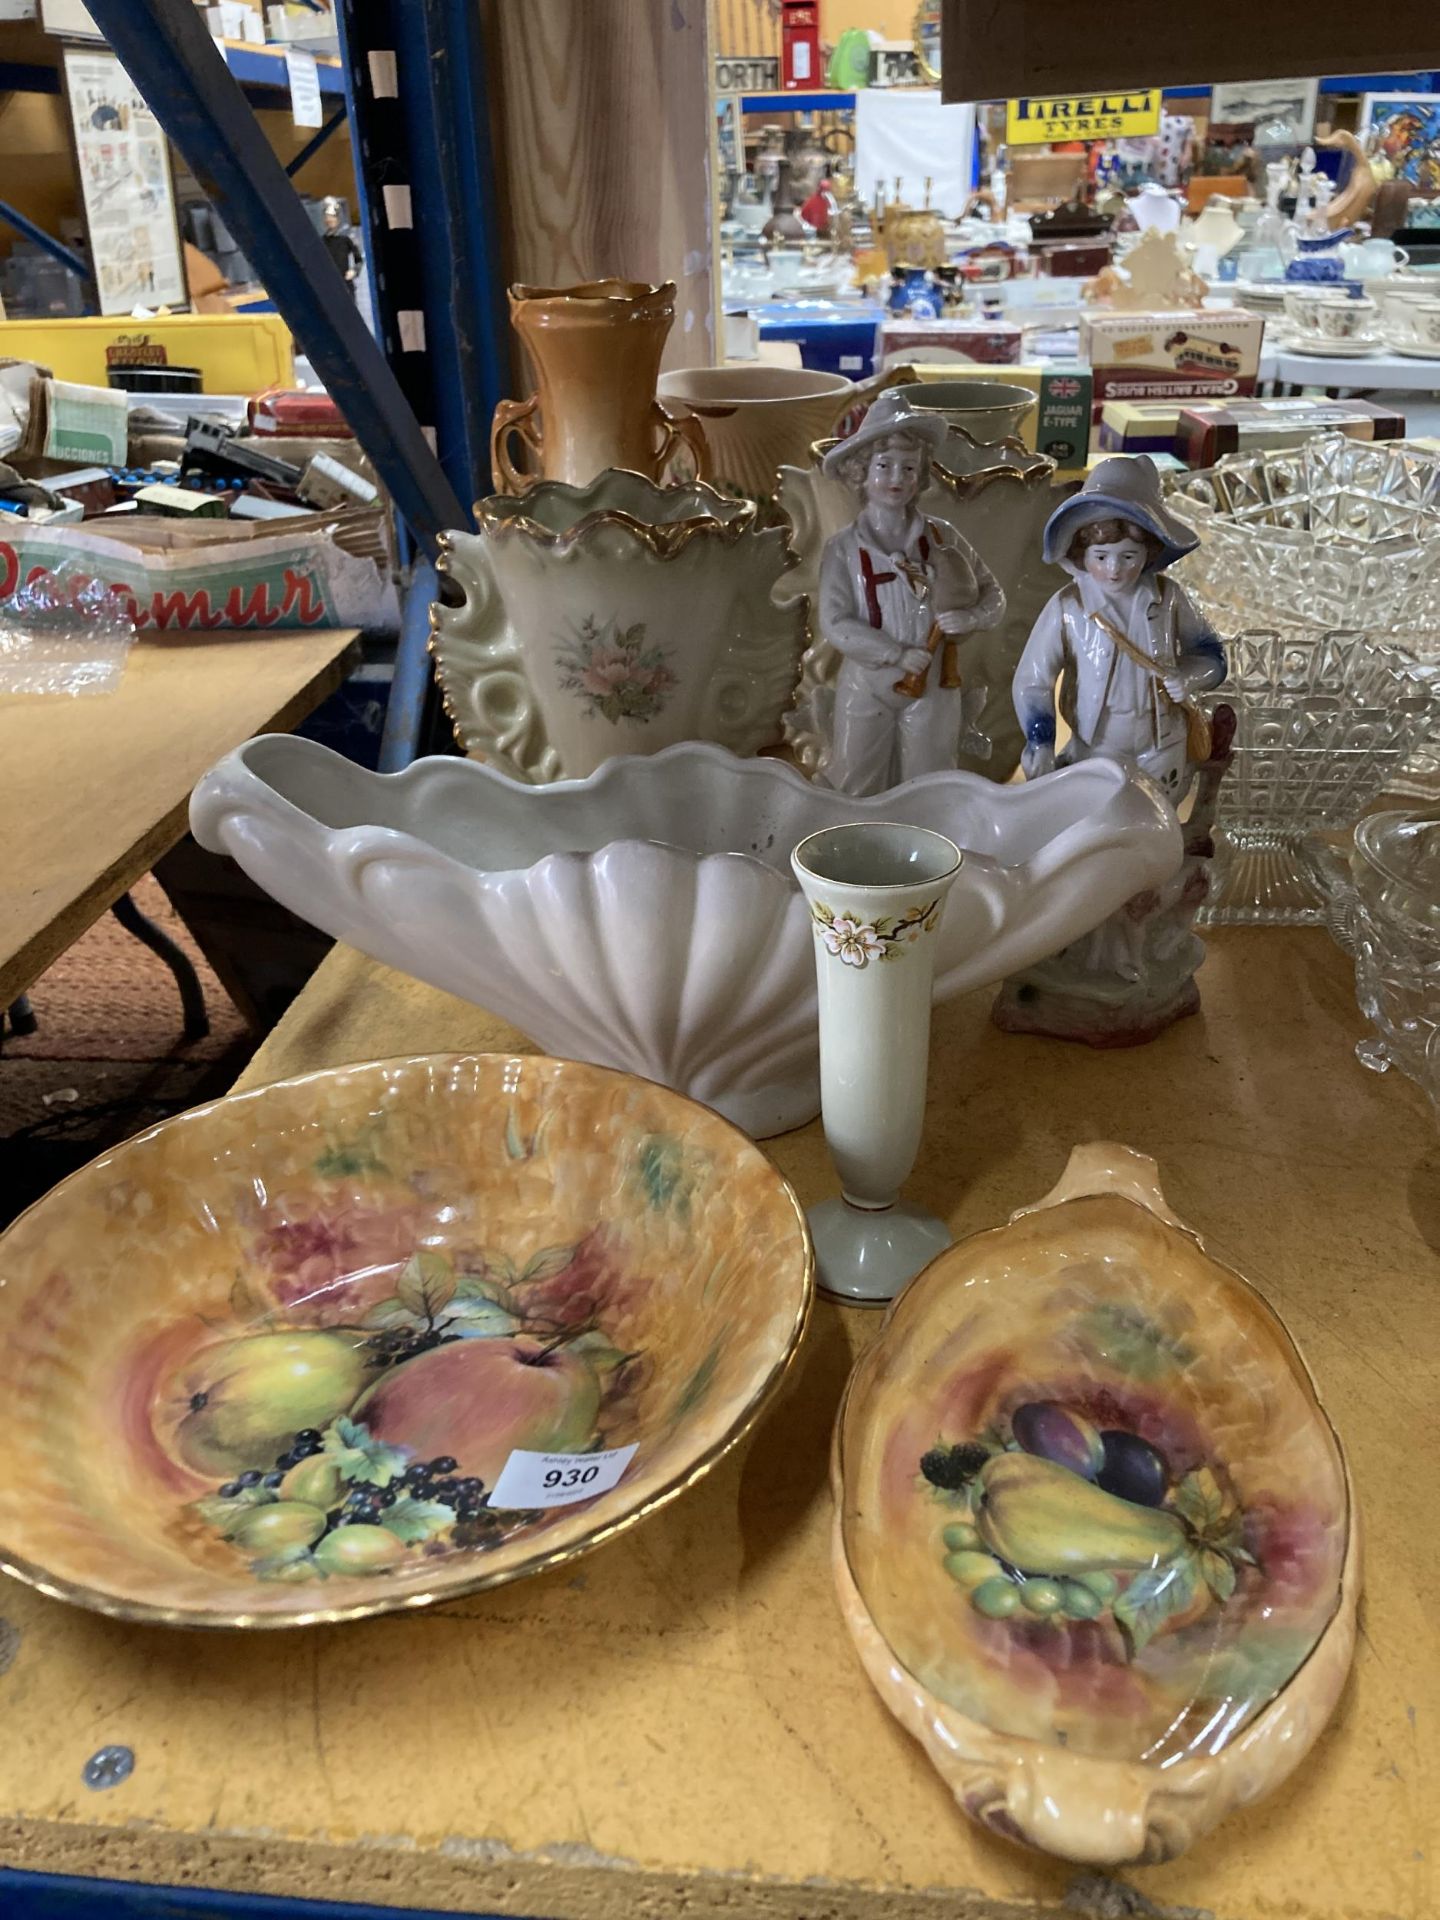 A LARGE QUANTITY OF VINTAGE CERAMIC ITEMS TO INCLUDE VASES, A PLANTER BOWLS, FIGURES, ETC